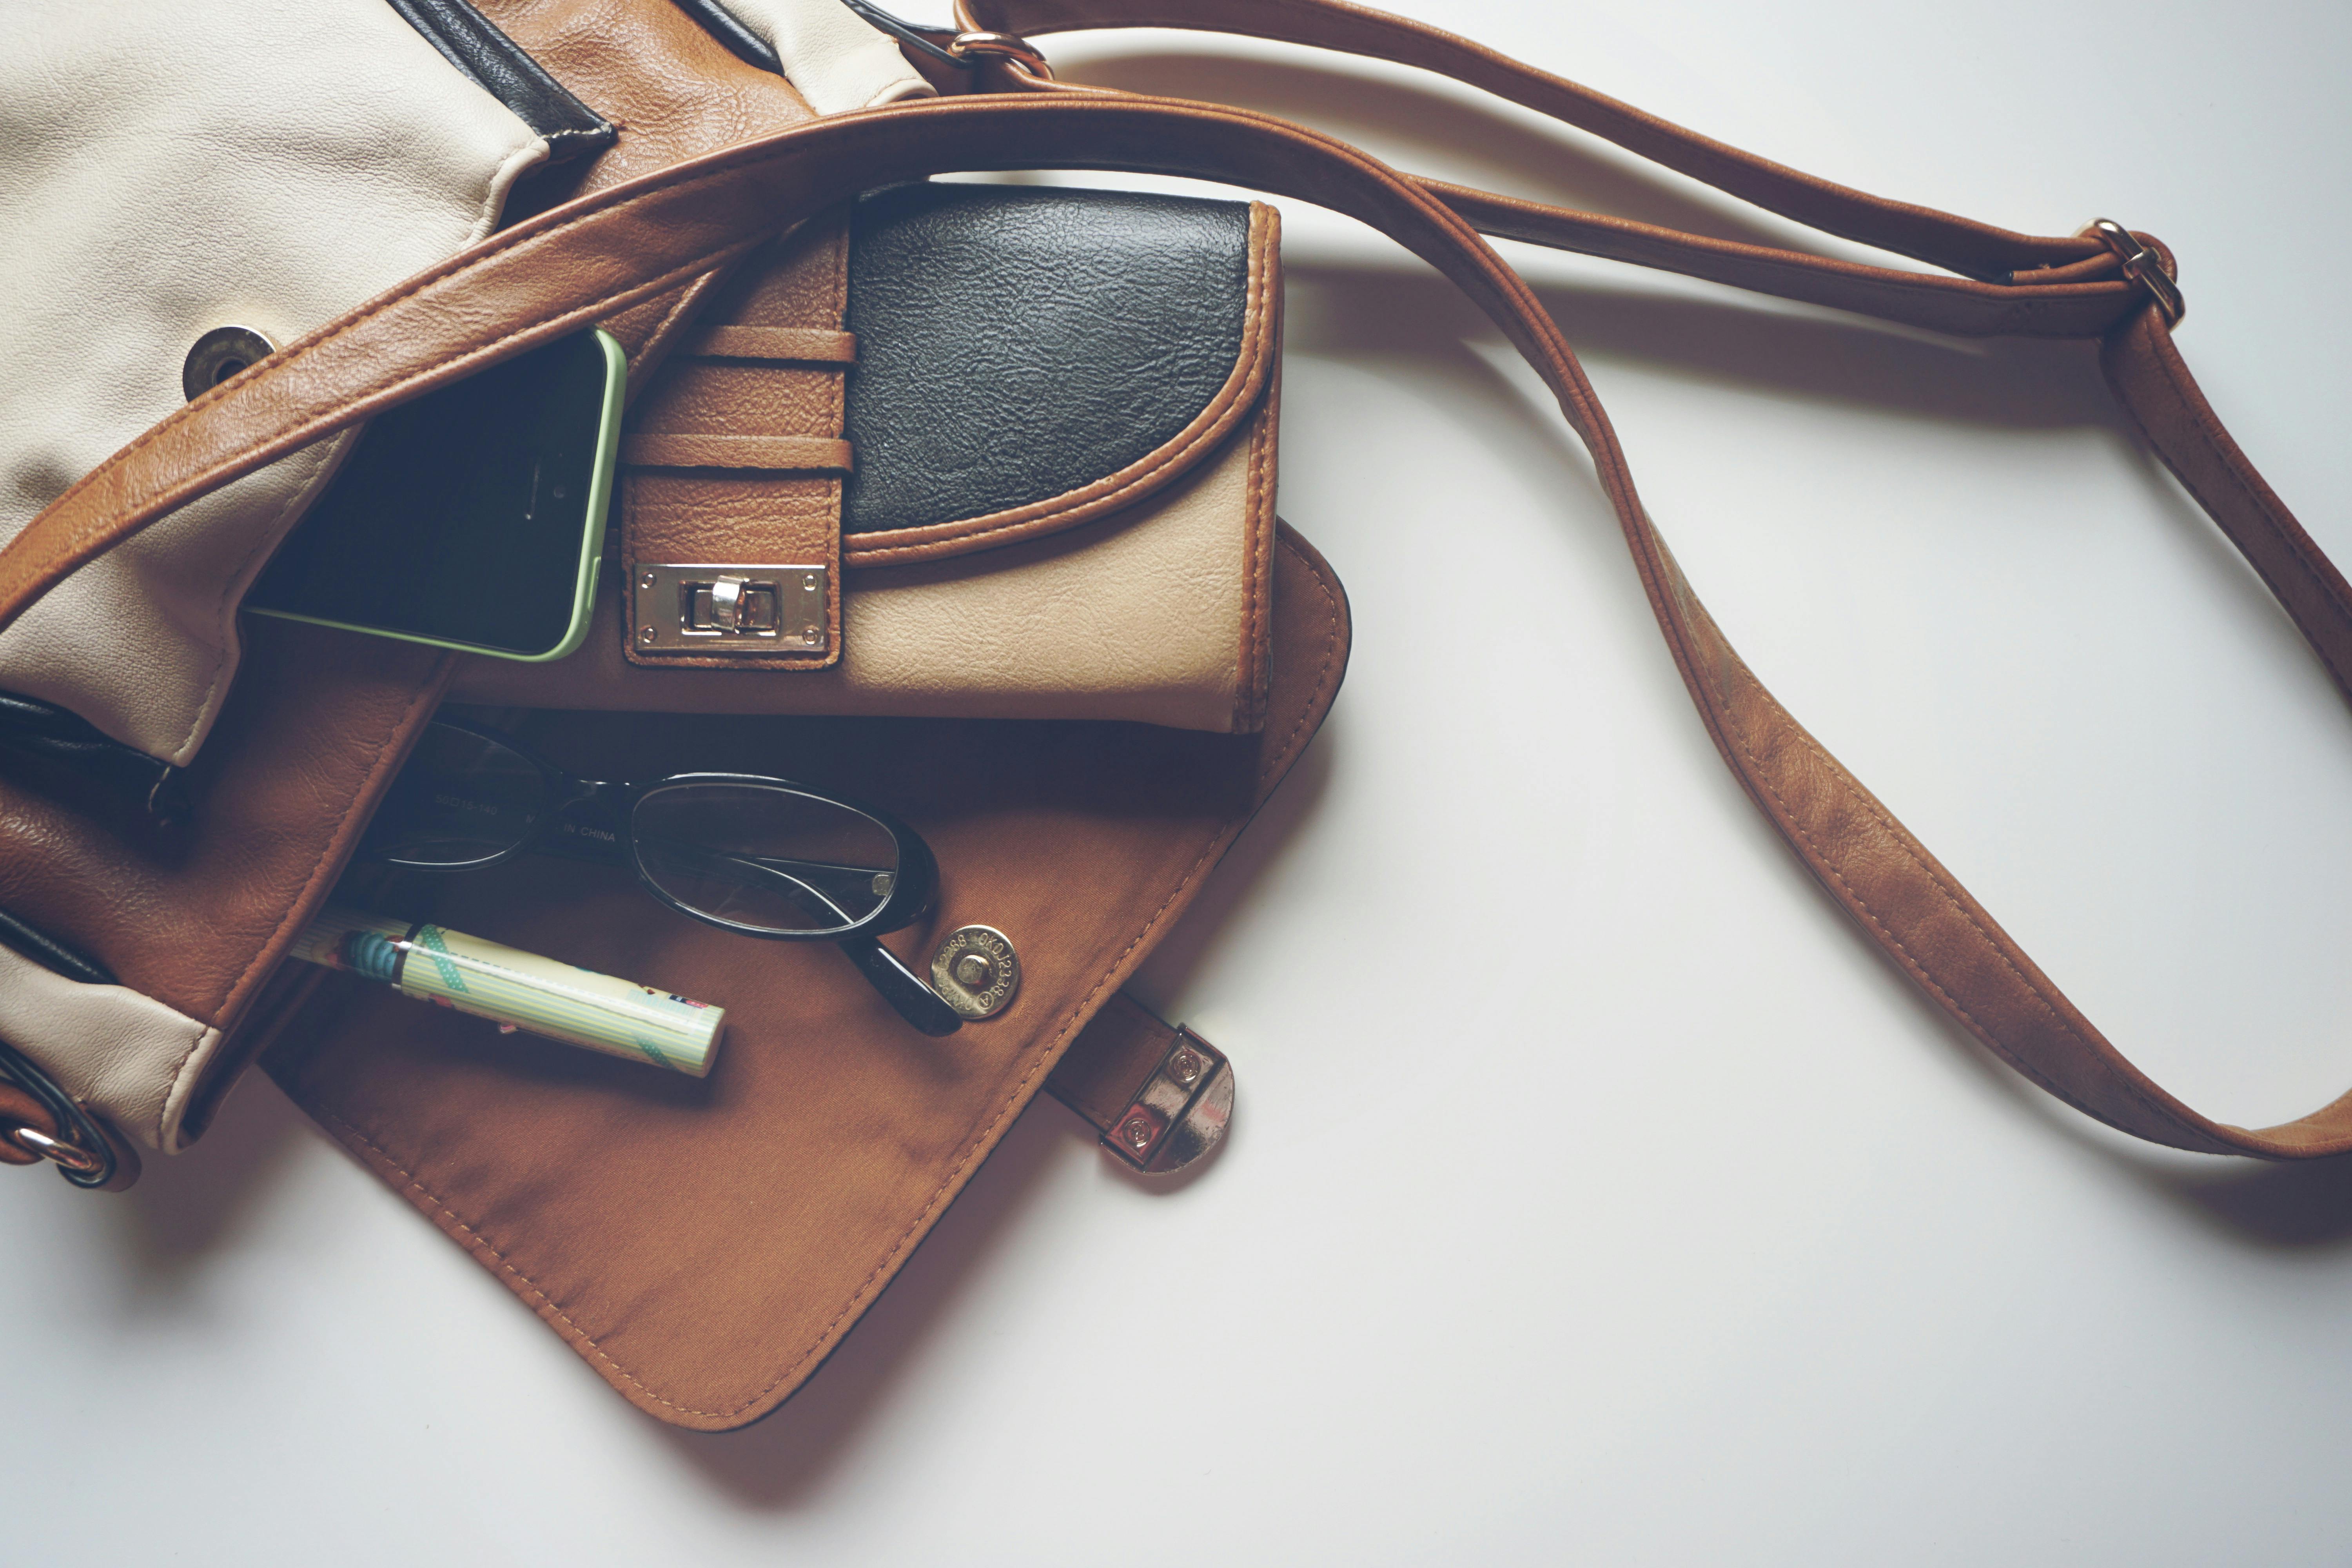 A bag with things spilling | Source: Pexels